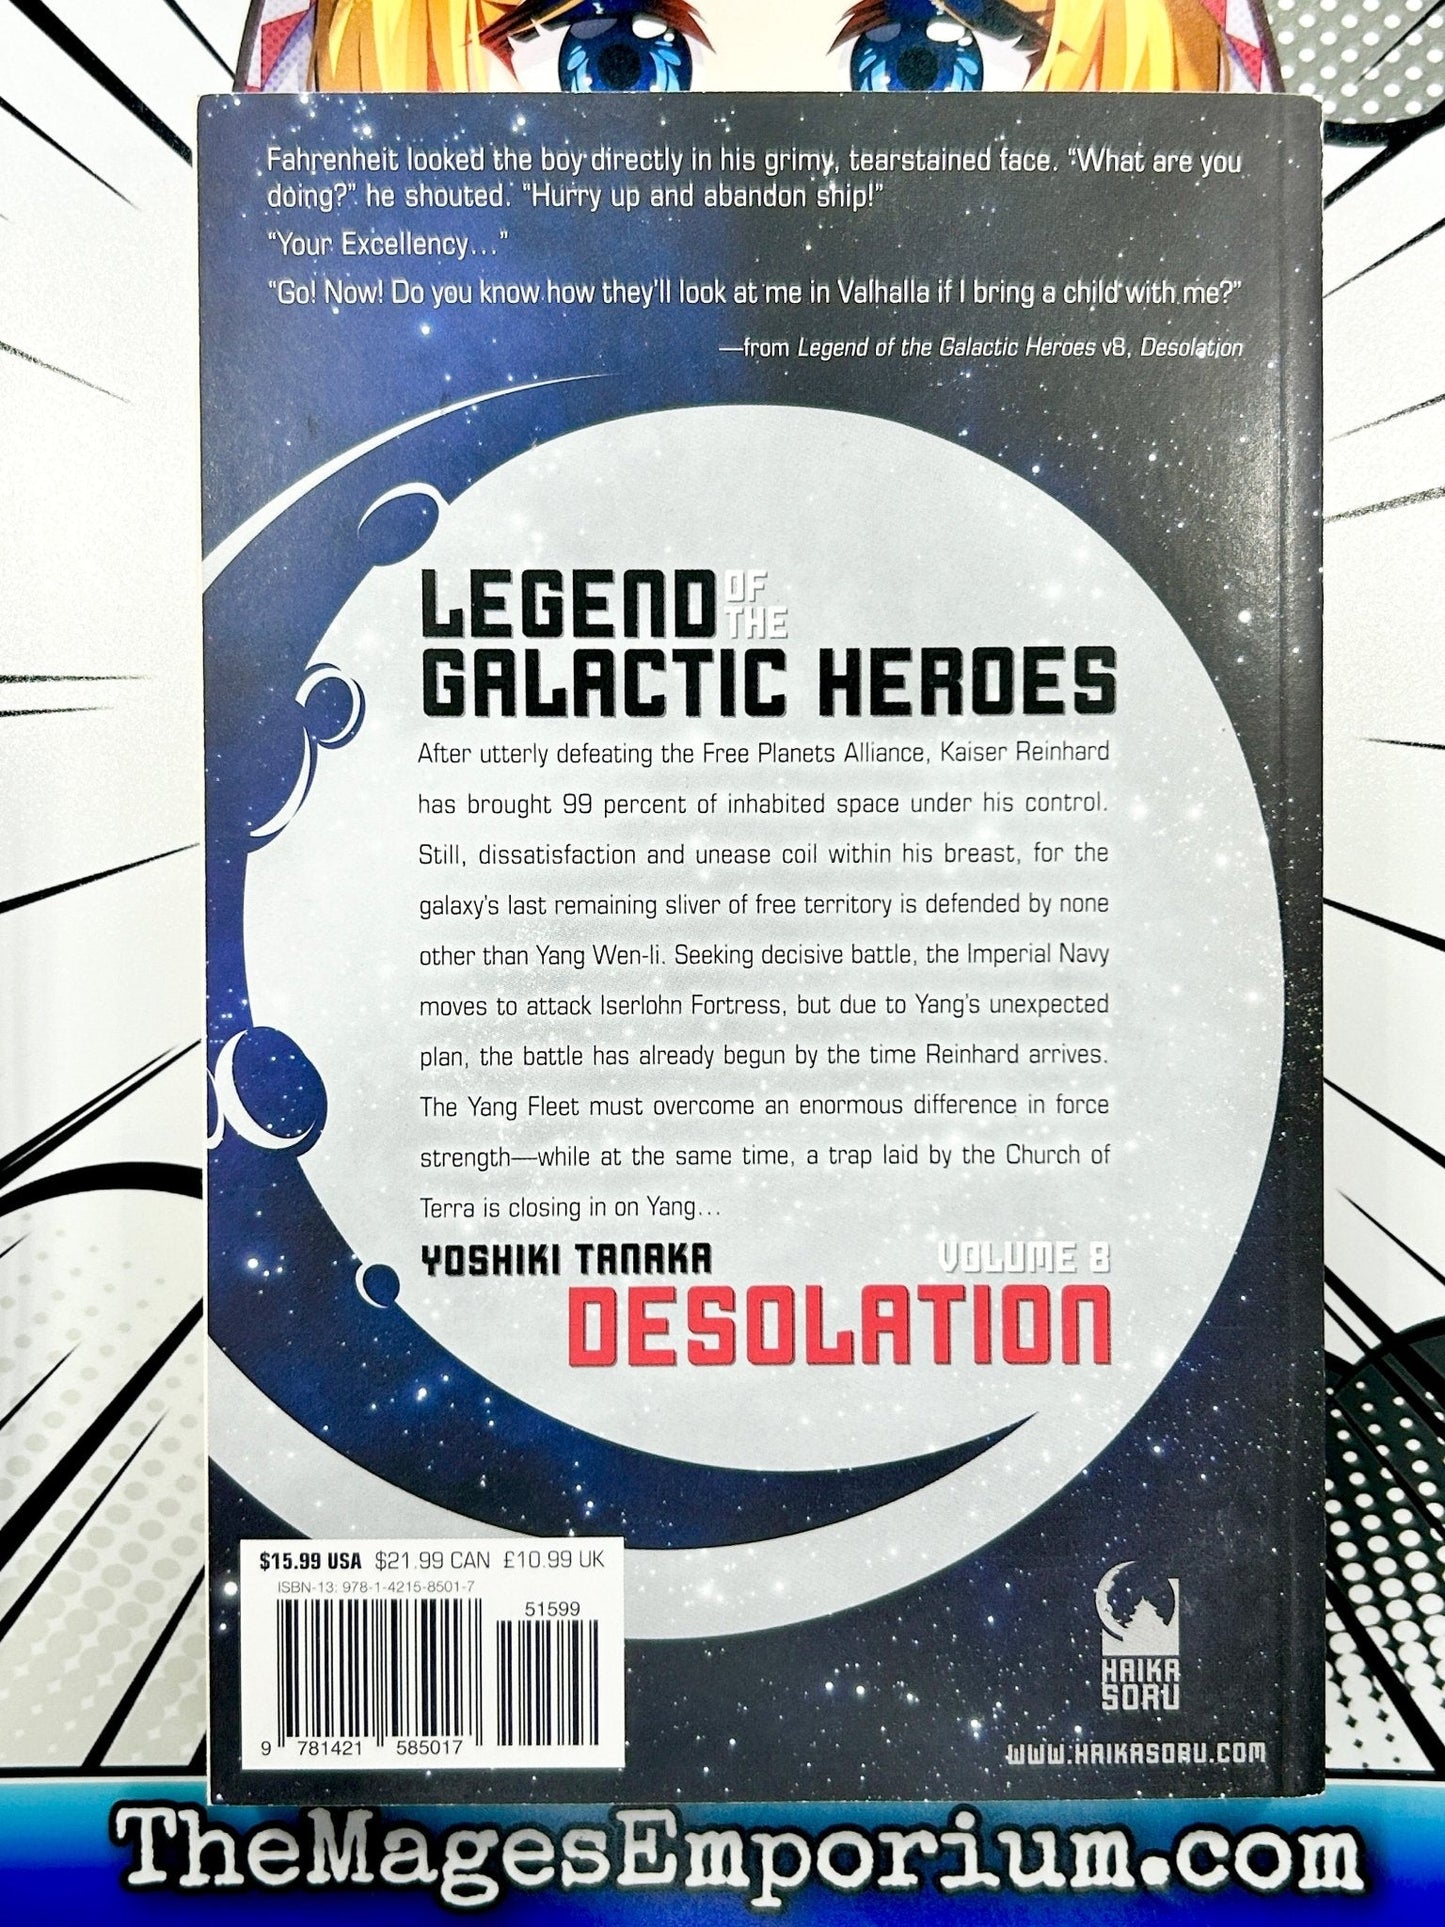 Legend of the Galactic Heroes Desolation Vol 8